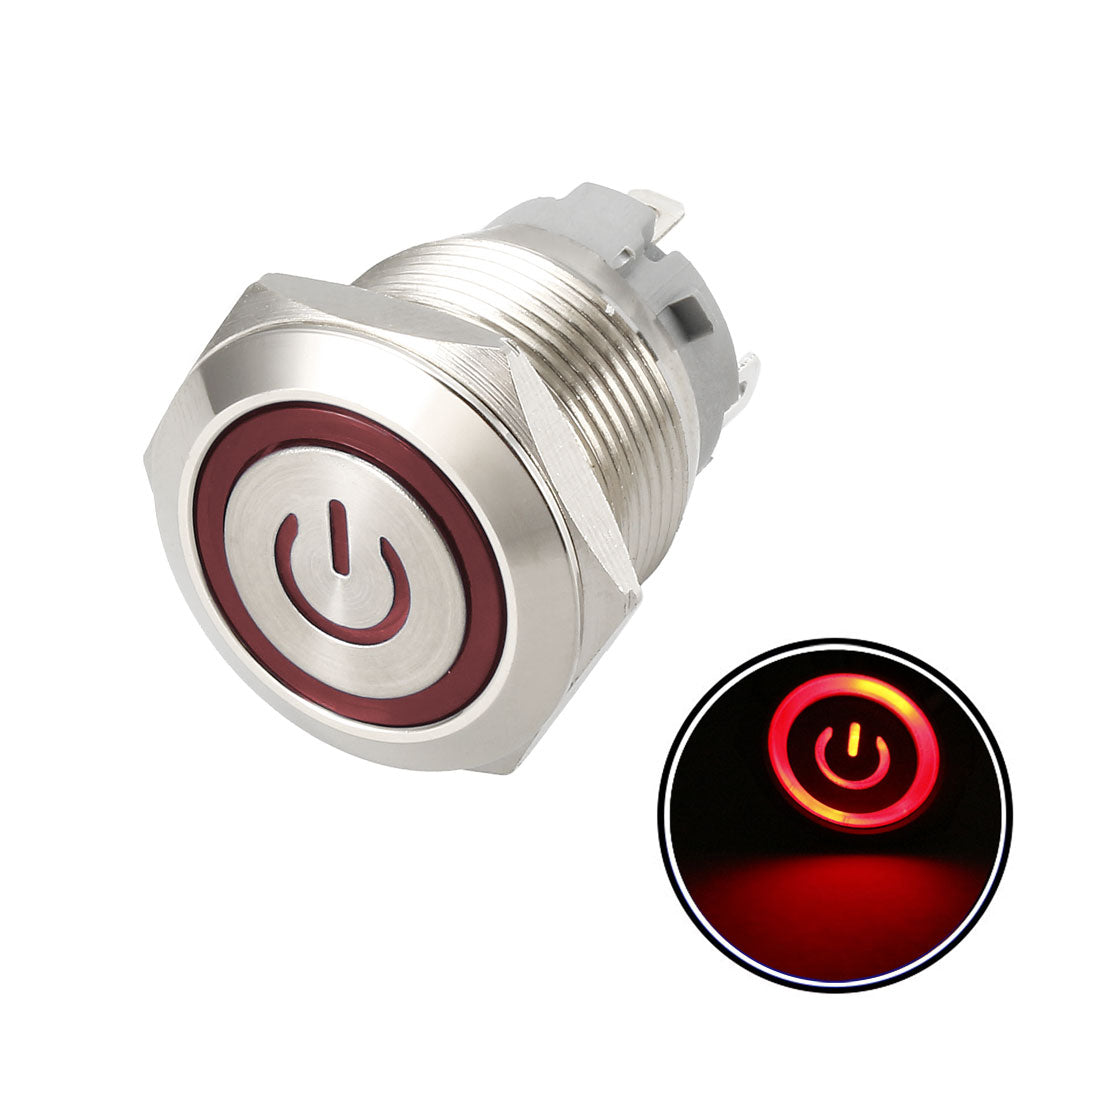 uxcell Uxcell Latching Metal Push Button Switch 19mm Mounting Dia 1NO 24V Red LED Light 1pcs